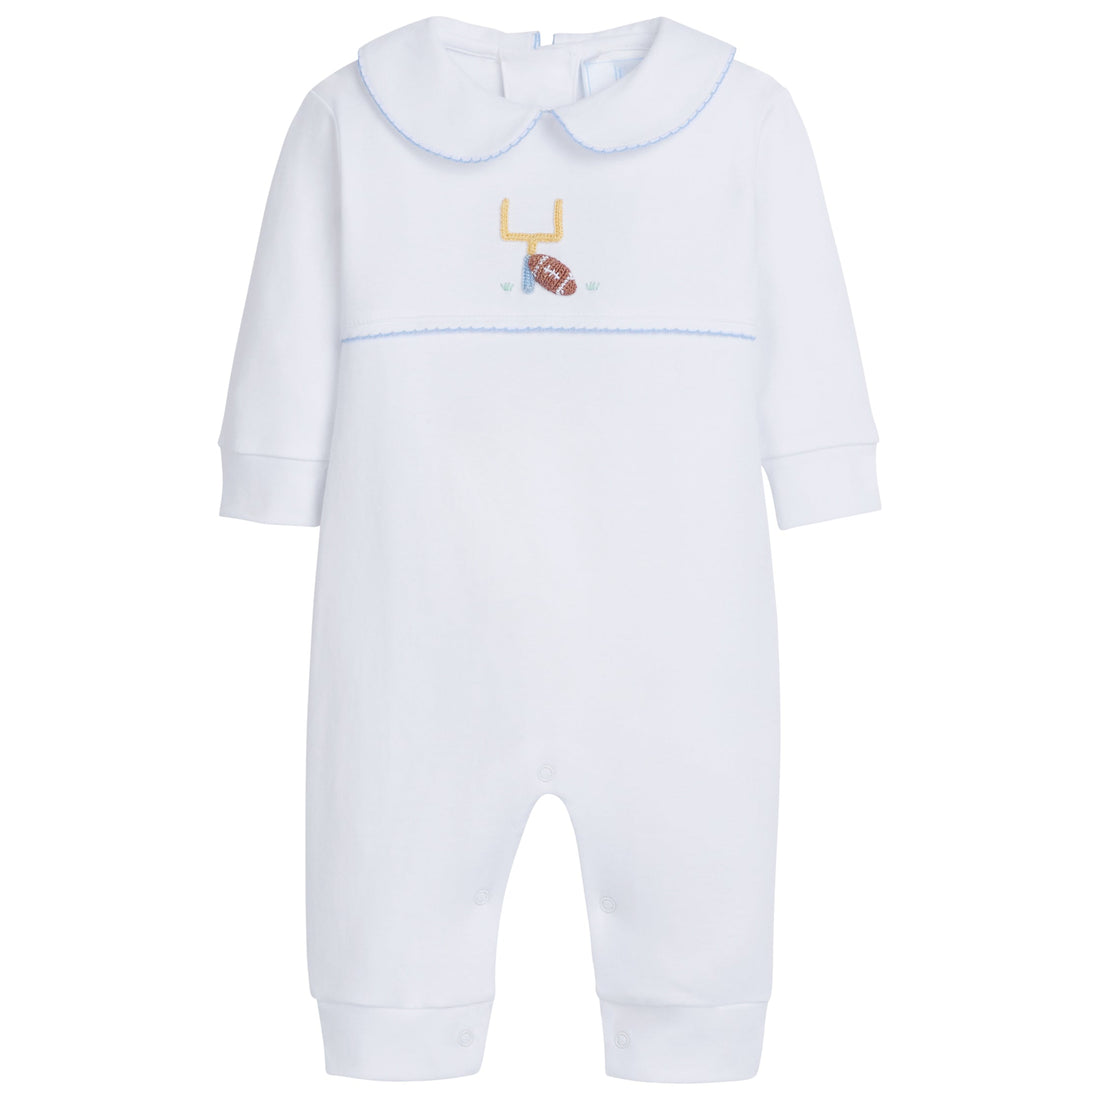 Little English classic childrens clothing baby boys playsuit with embroidered football on chest and blue trim